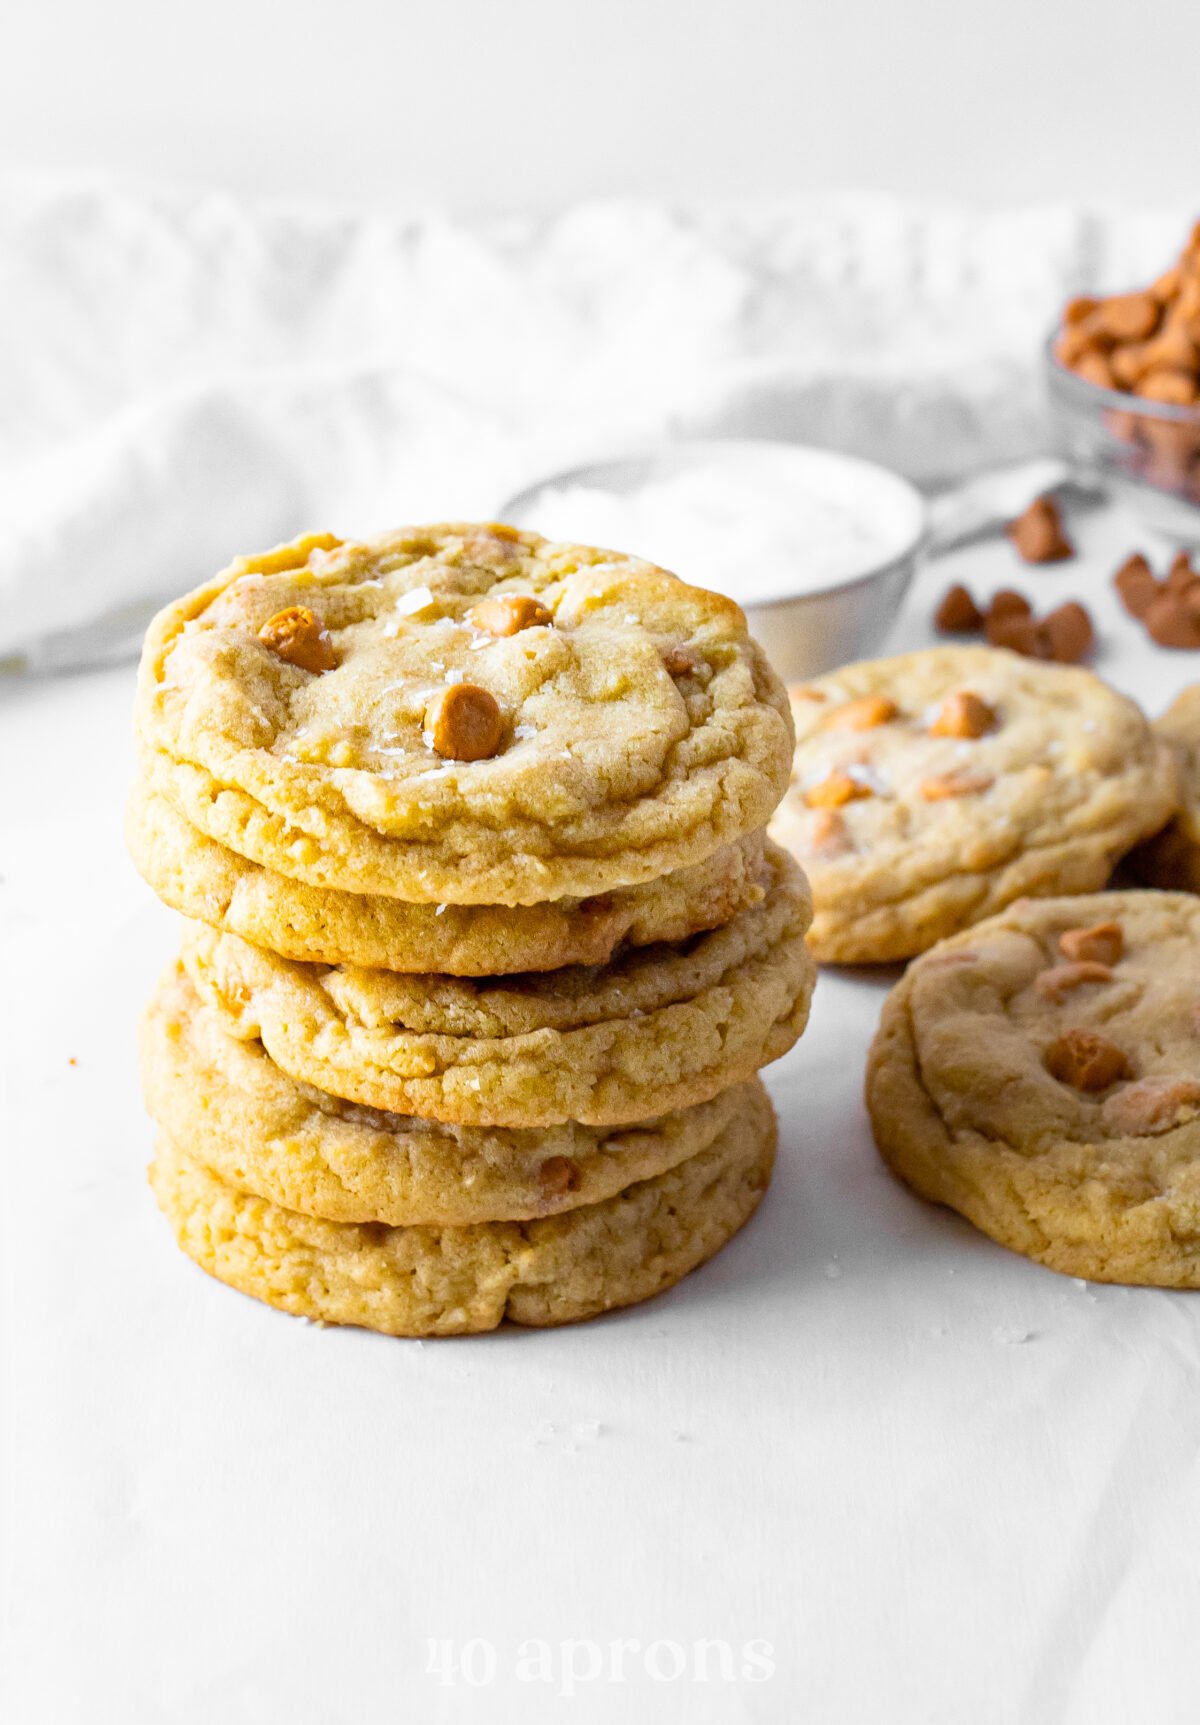 A side view of a stack of chewy butterscotch cookies next to a pile of cookies and in front of a napkin.